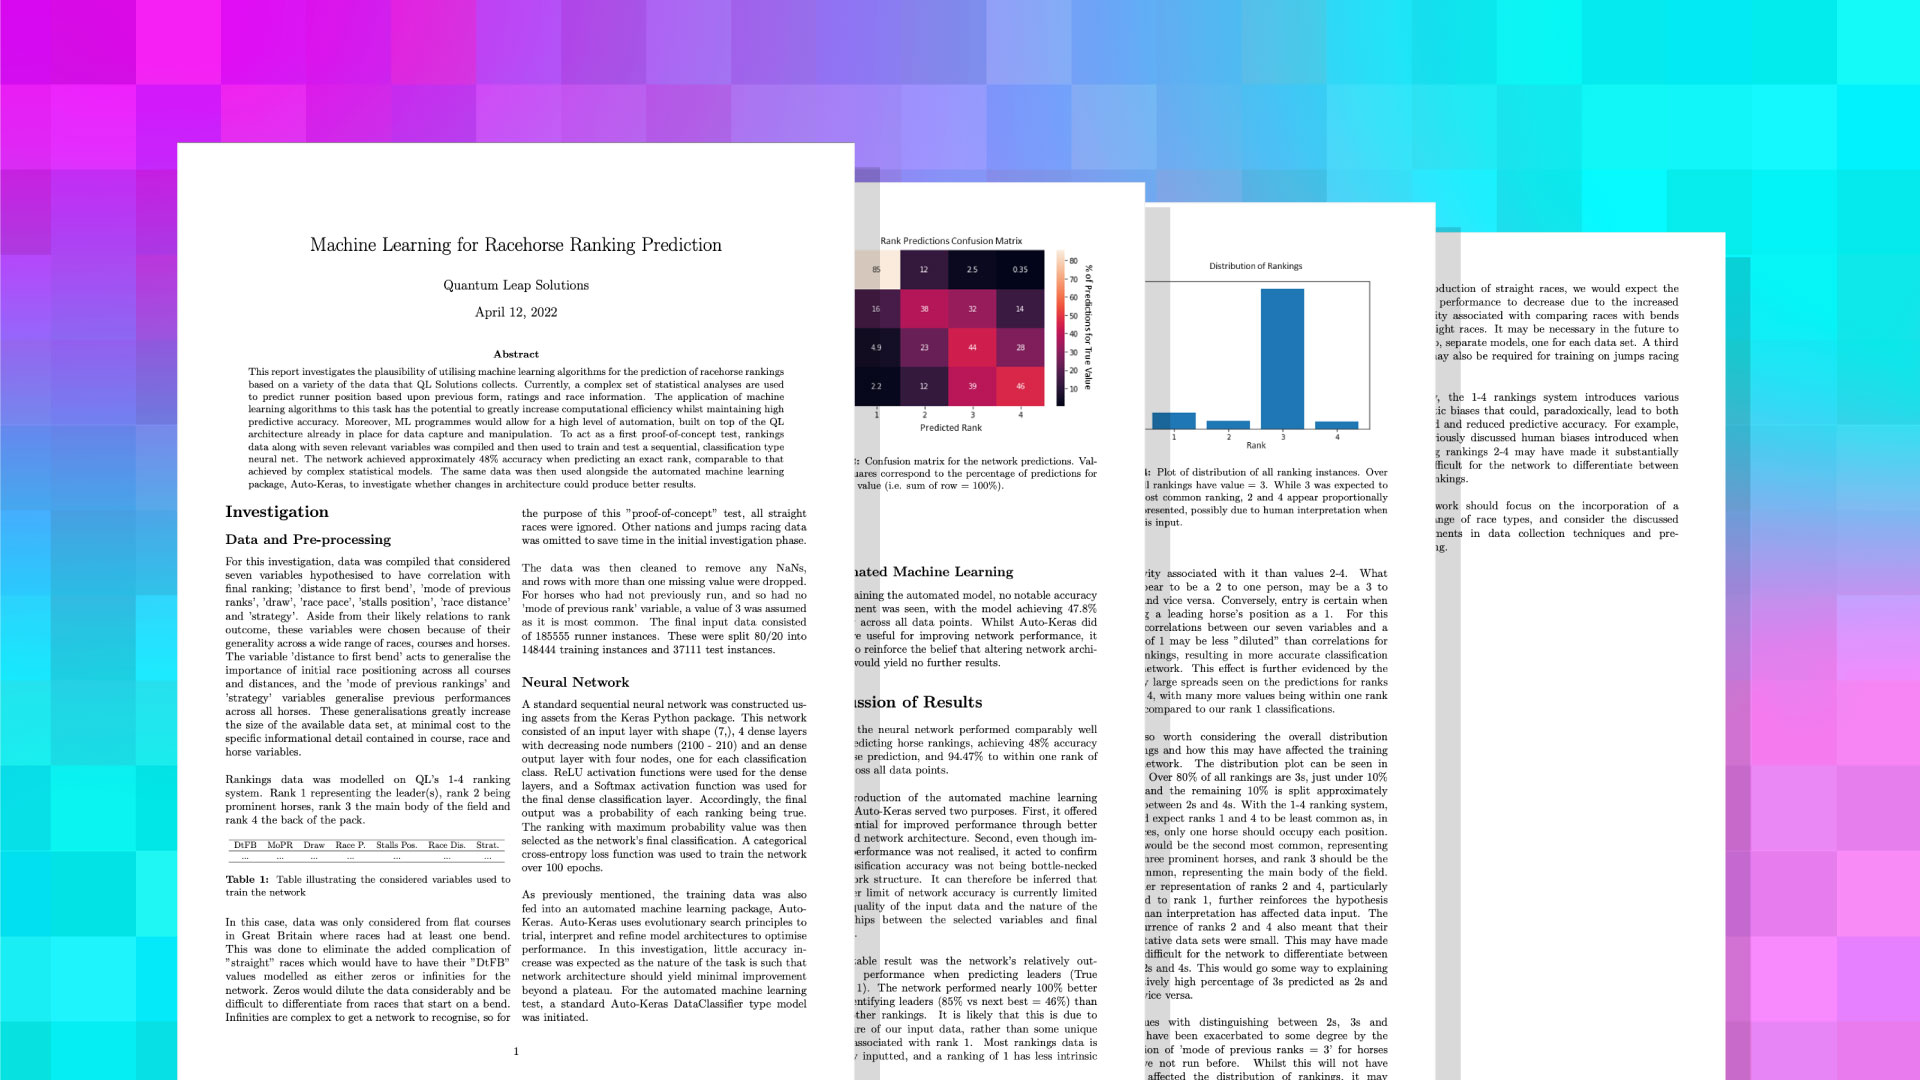 Image shows the 4 pages from a Quantum Leap research paper on Machine Learning for Racehorse Ranking Prediction